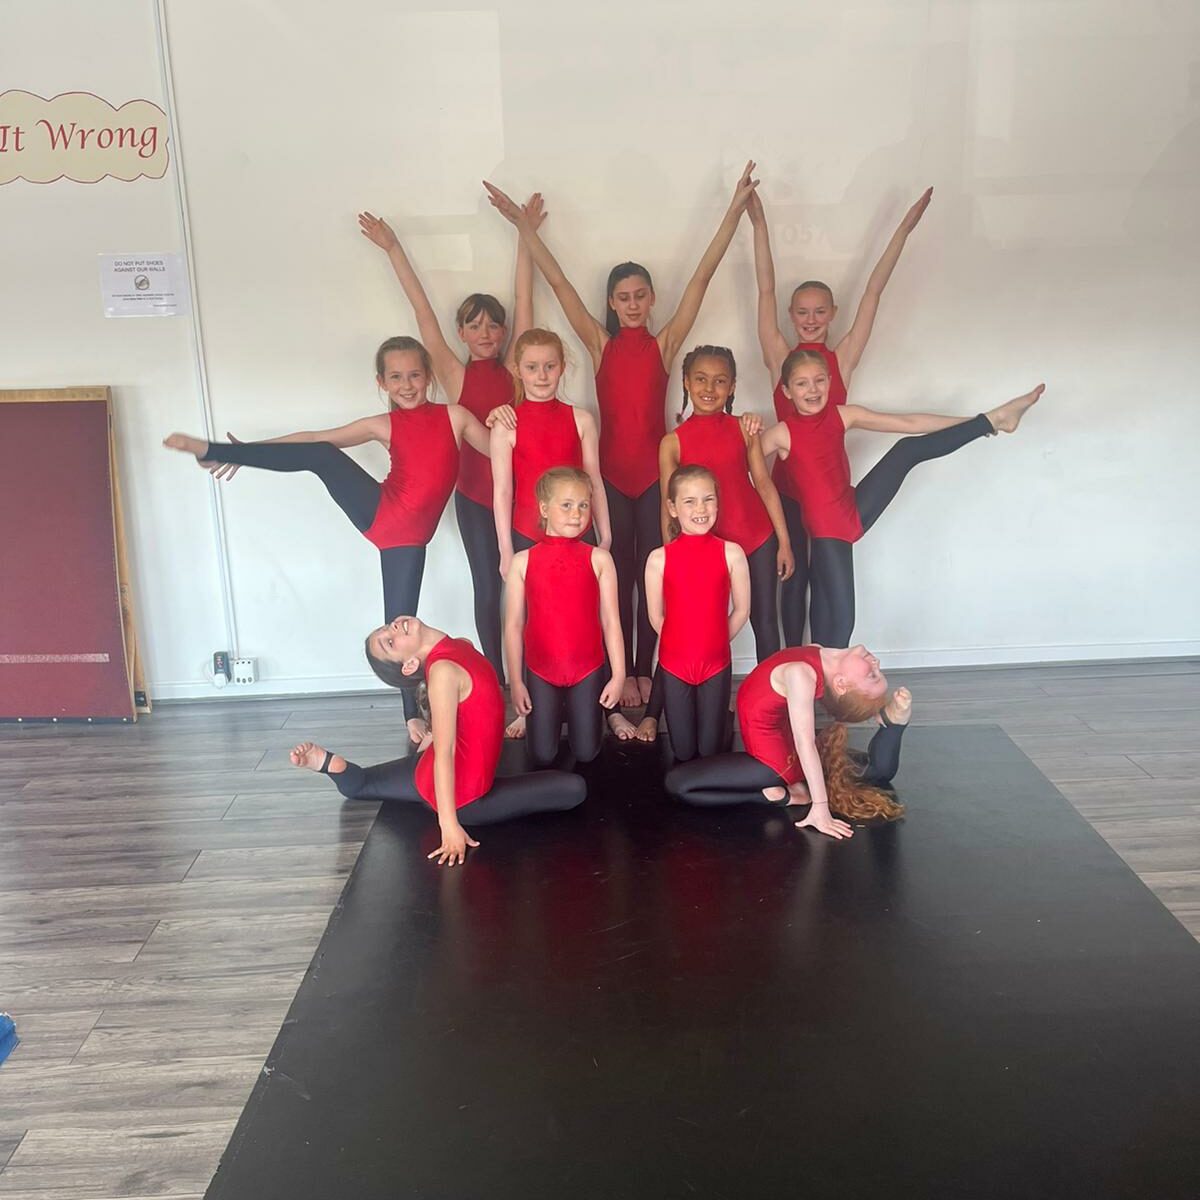 Performers dressed in red colorful suits pose in a dance formation in a practice room.